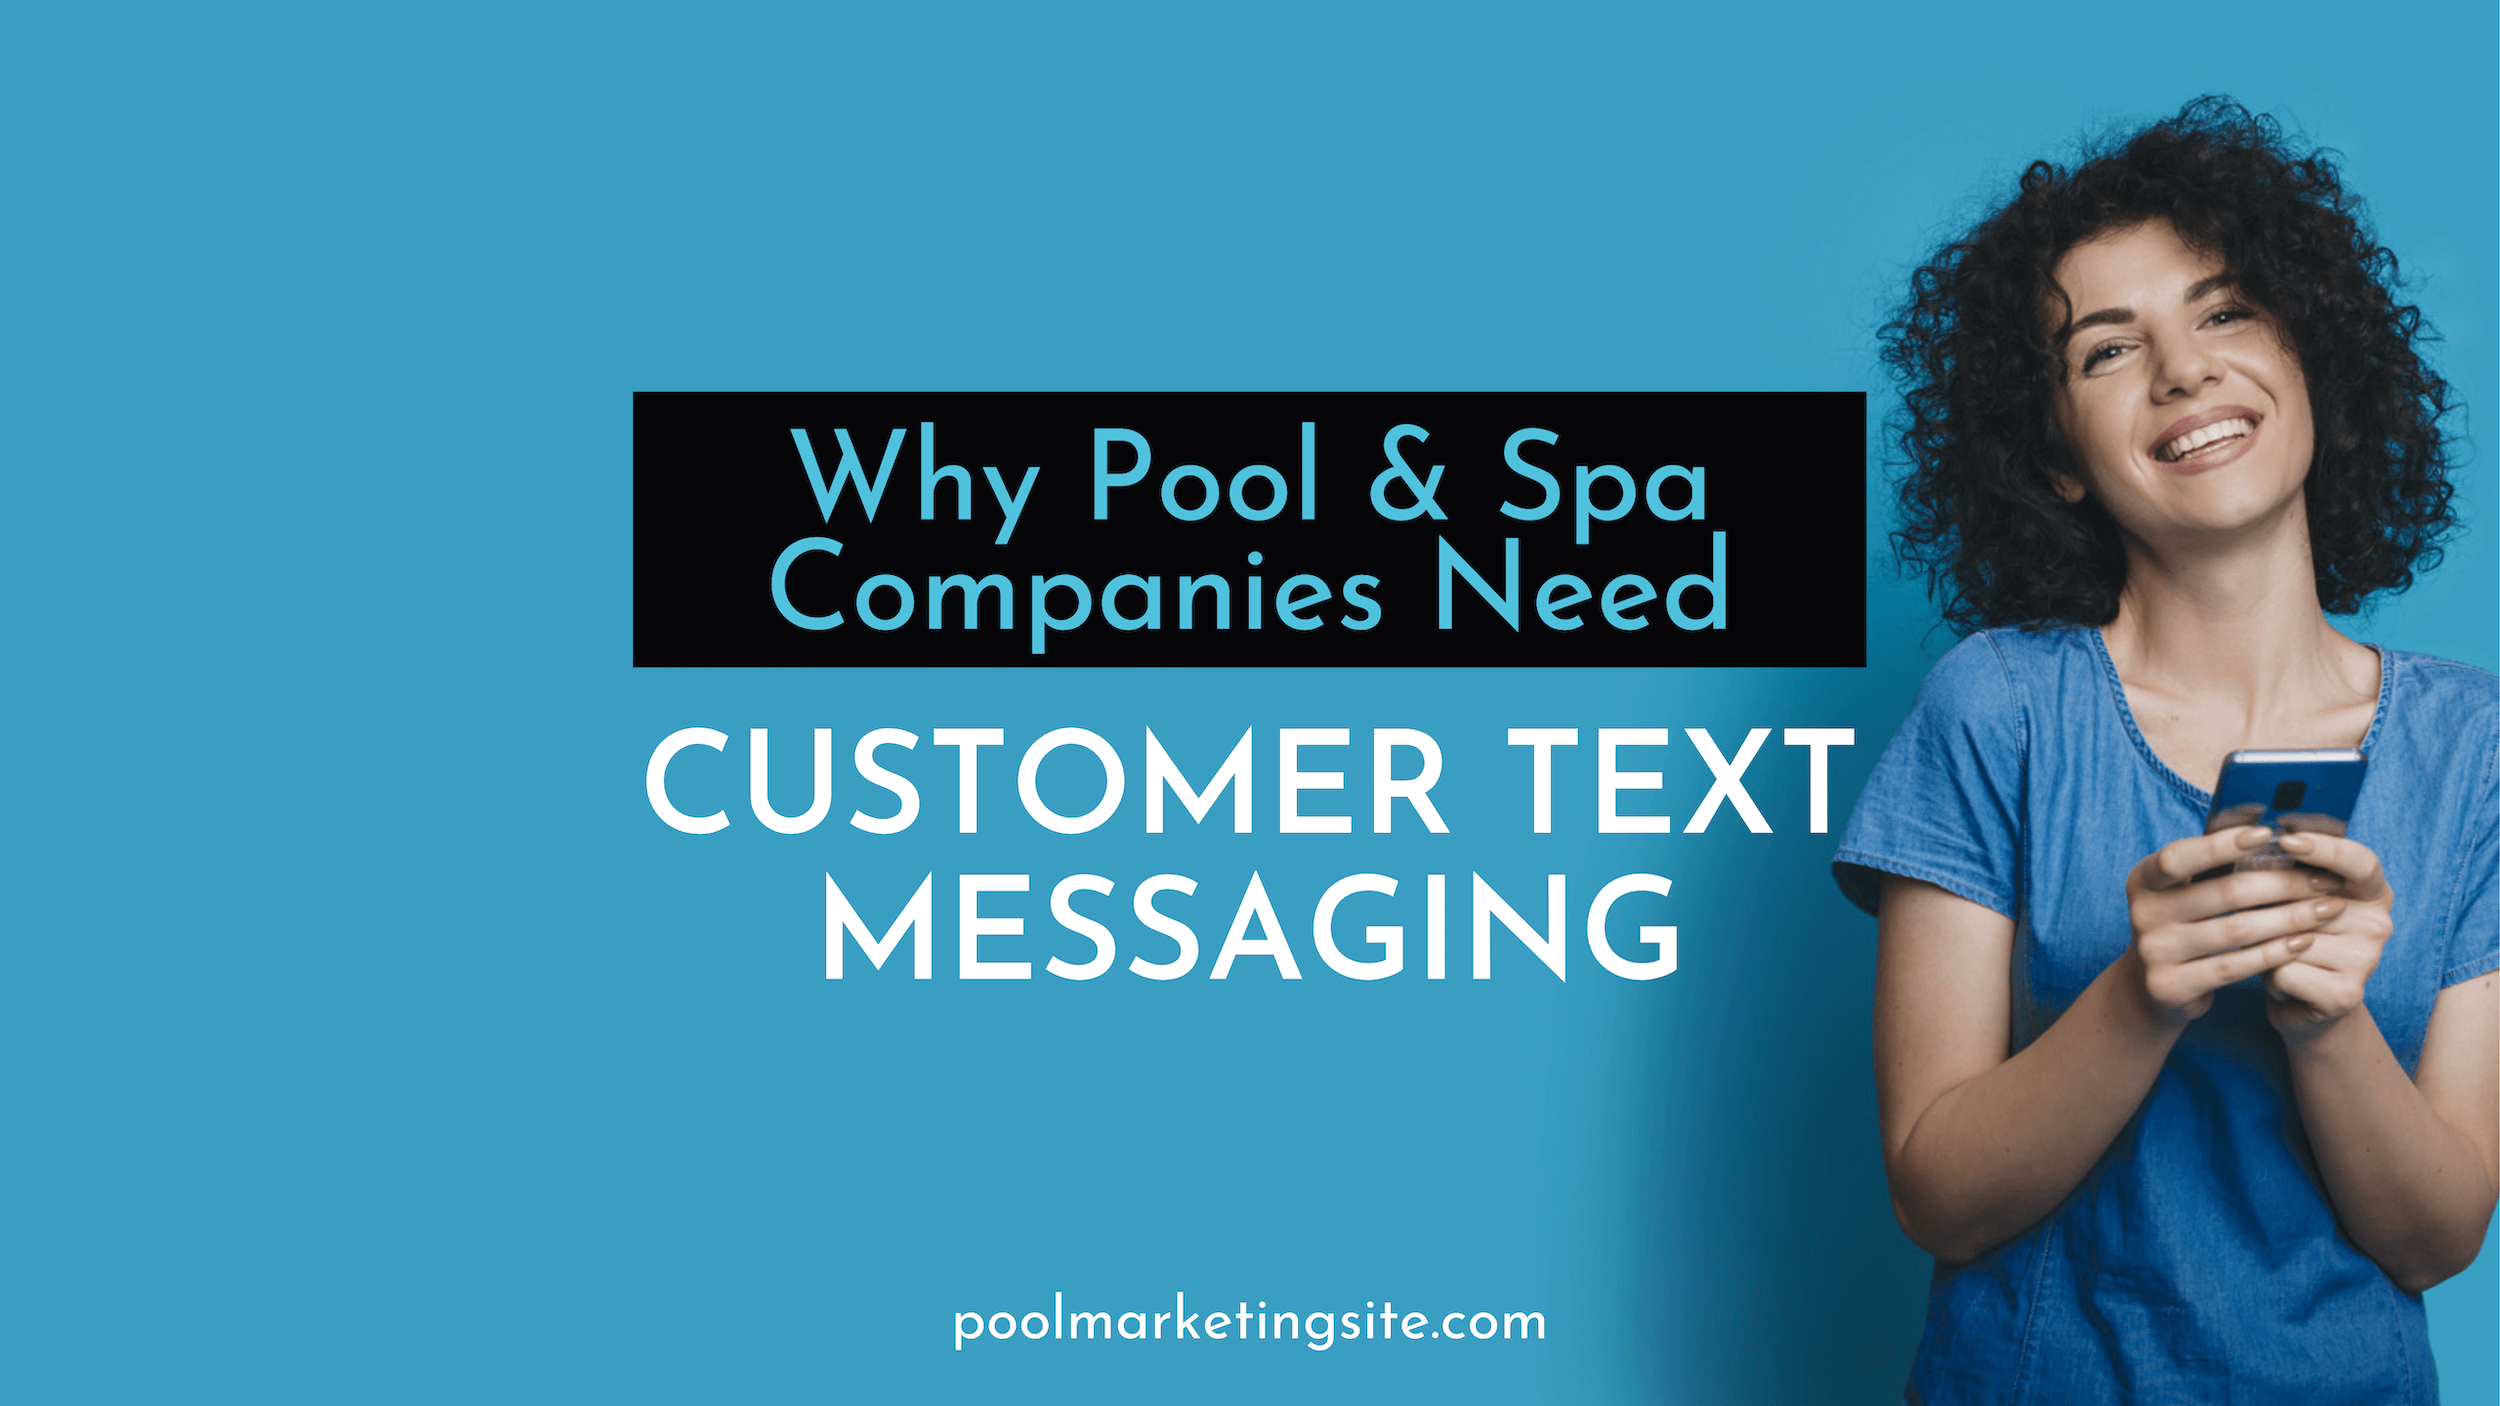 Why Pool & Spa Companies Need Customer Text Messaging